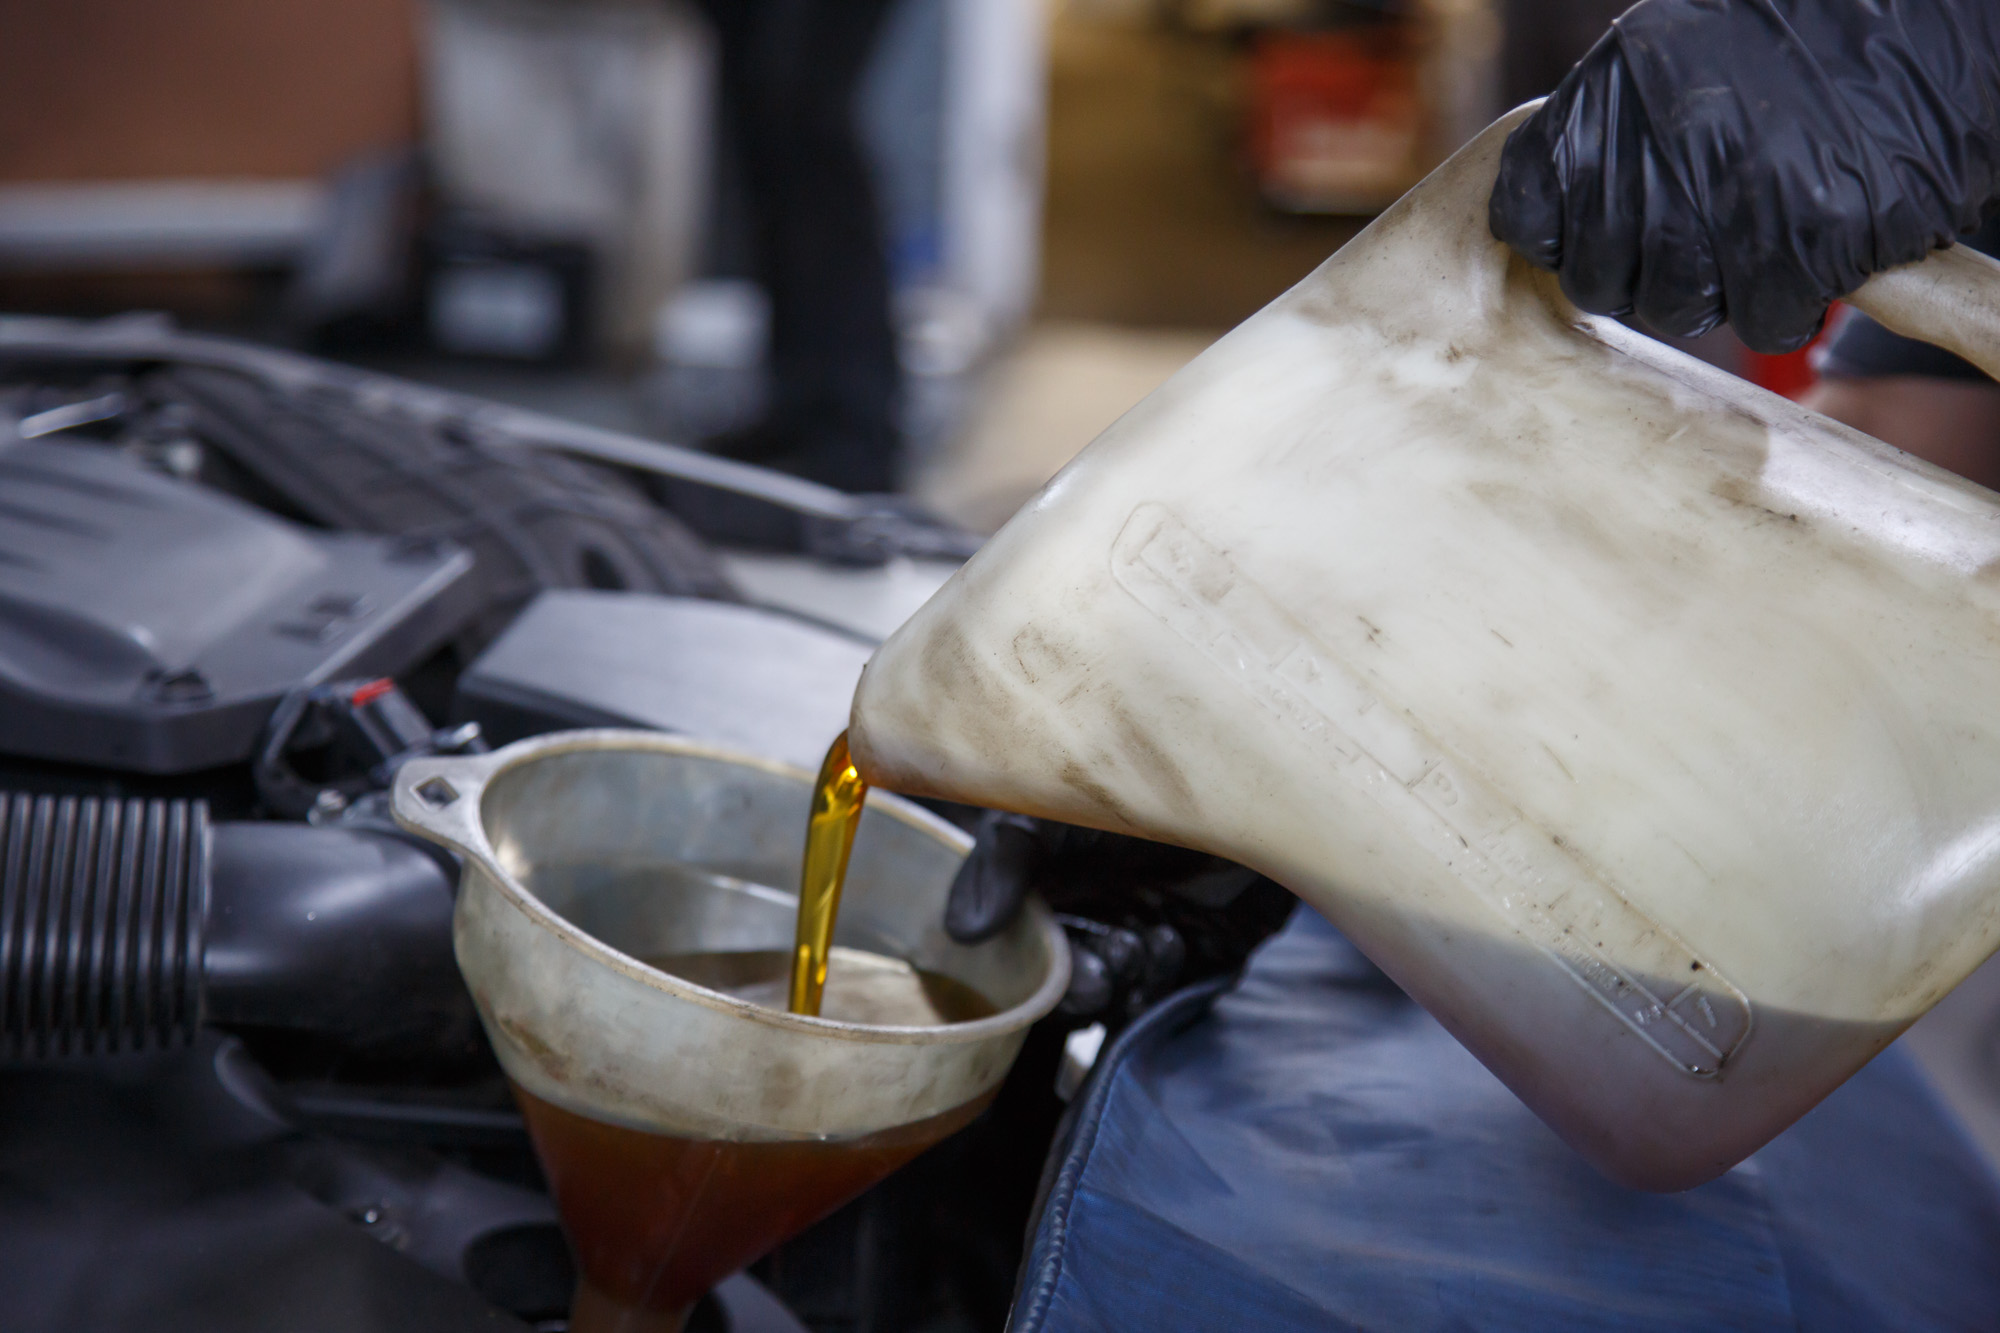 best-motor-oils-for-your-car-engine-in-2019-synthetic-engine-oil